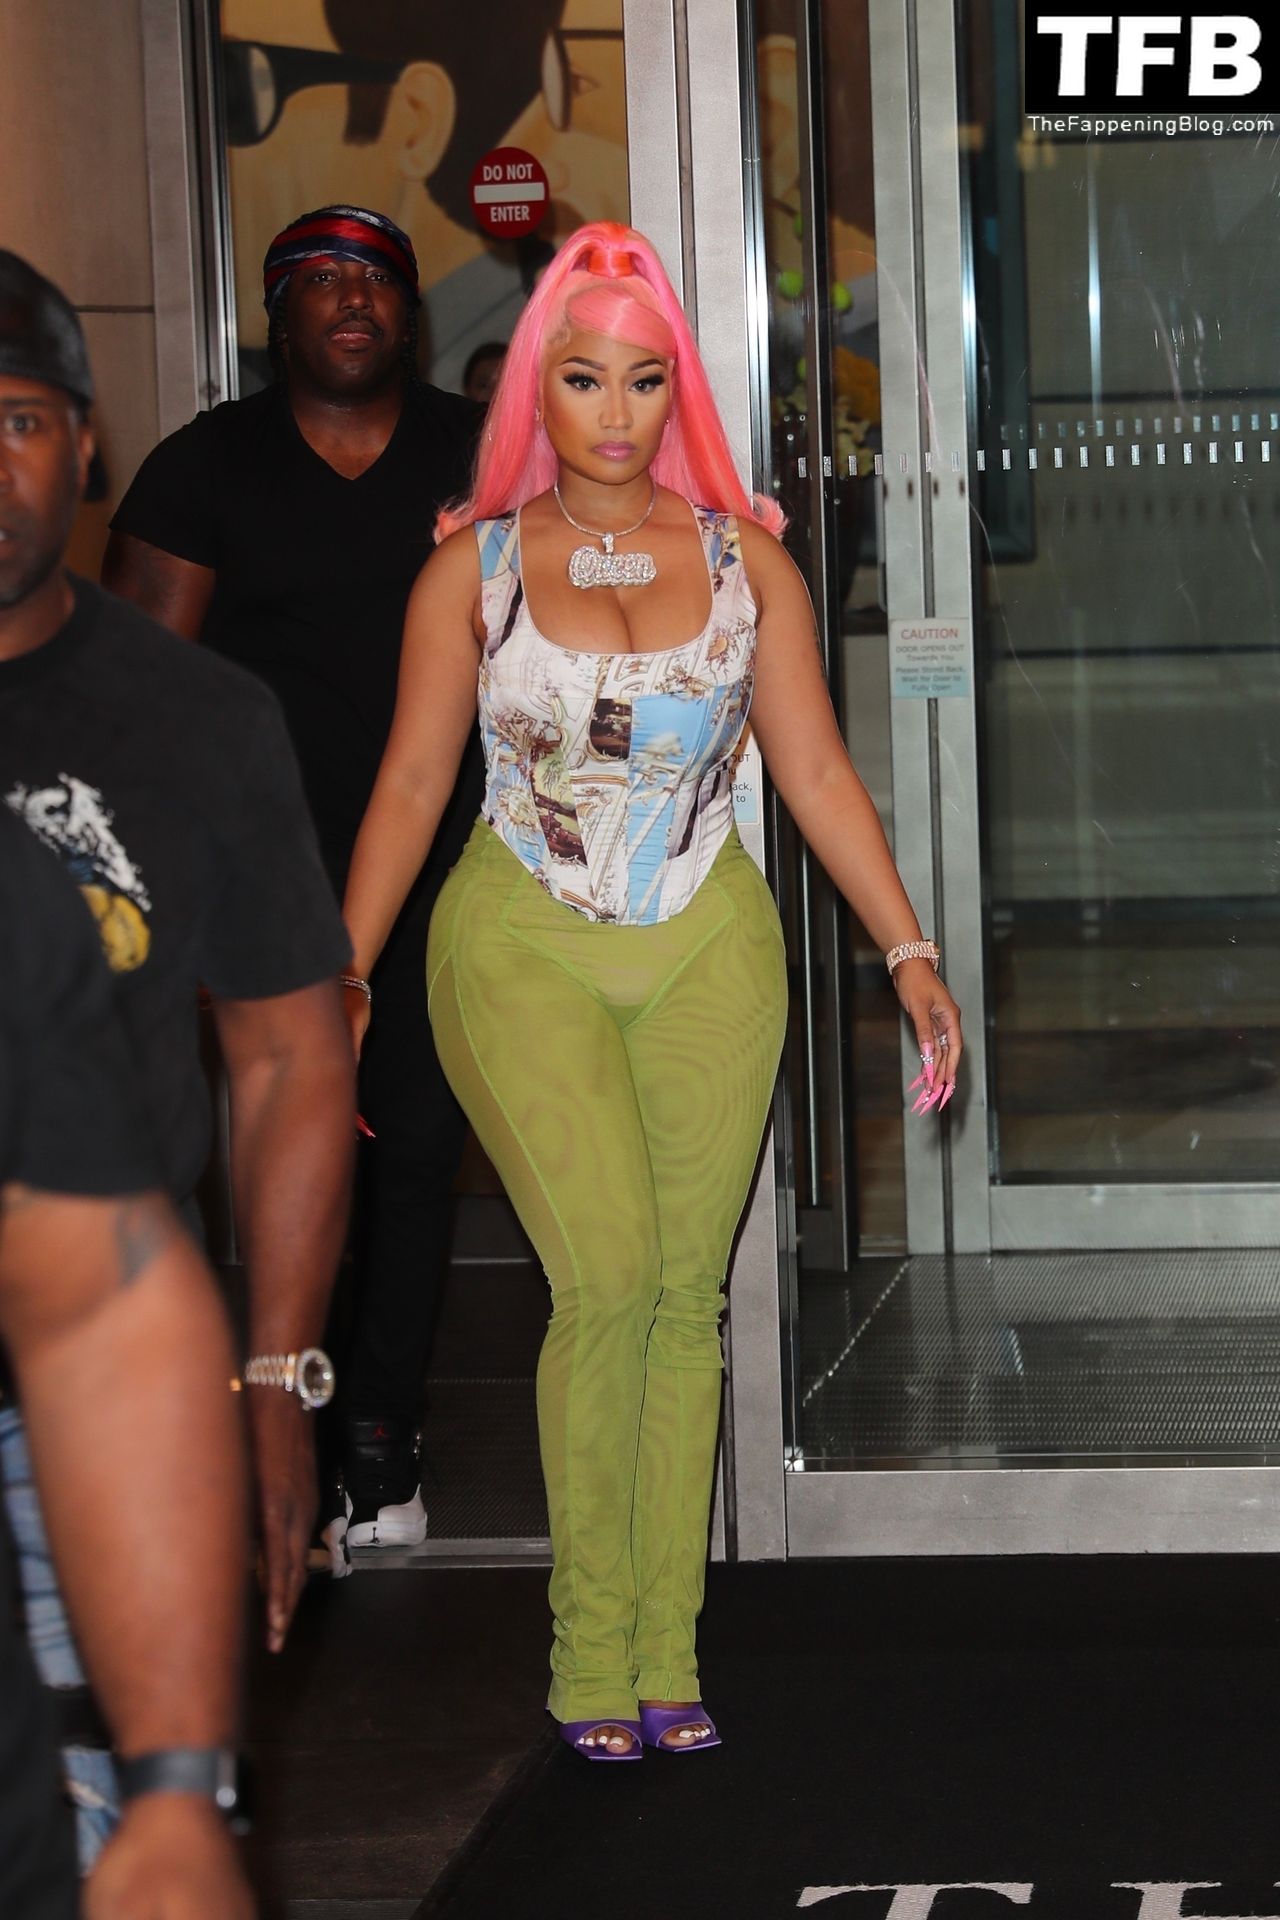 Nicki Minaj Sexy The Fappening Blog 2 - Nicki Minaj Checks Out of Her Hotel After Her Epic Night at the MTV VMA’s in NYC (38 Photos)